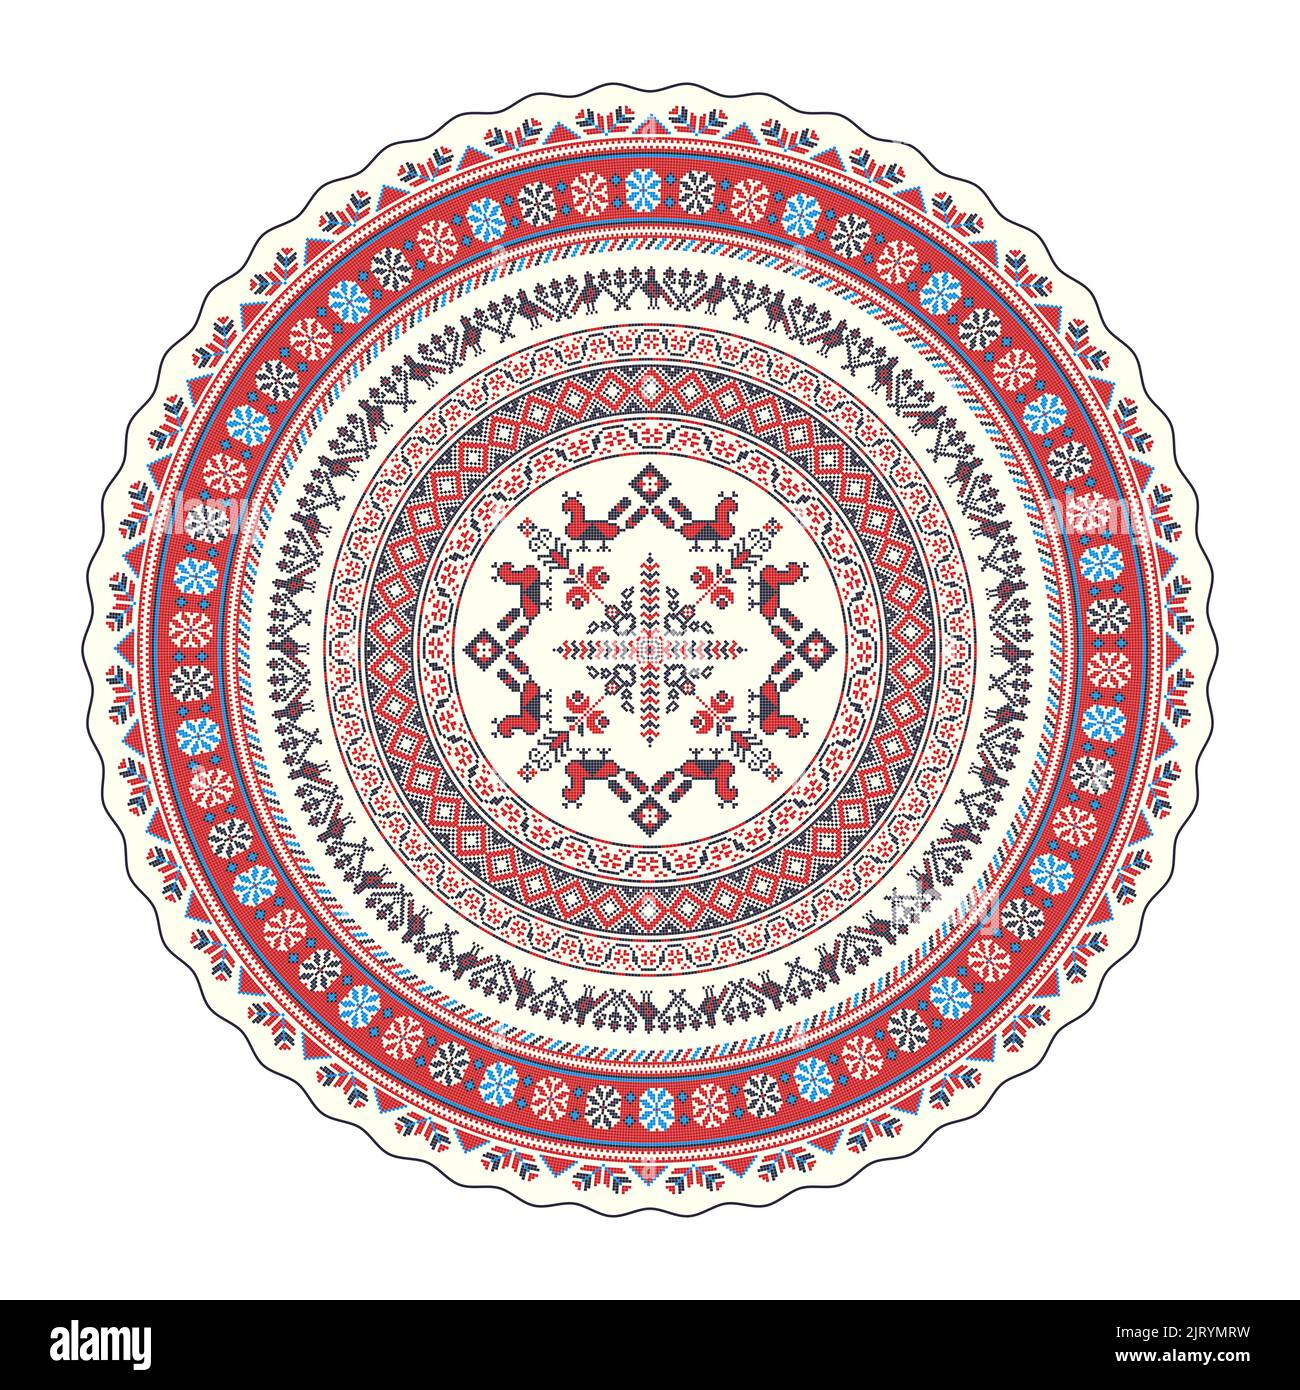 Ukrainian embroidery round symbol, vector graphic over white background Stock Photo